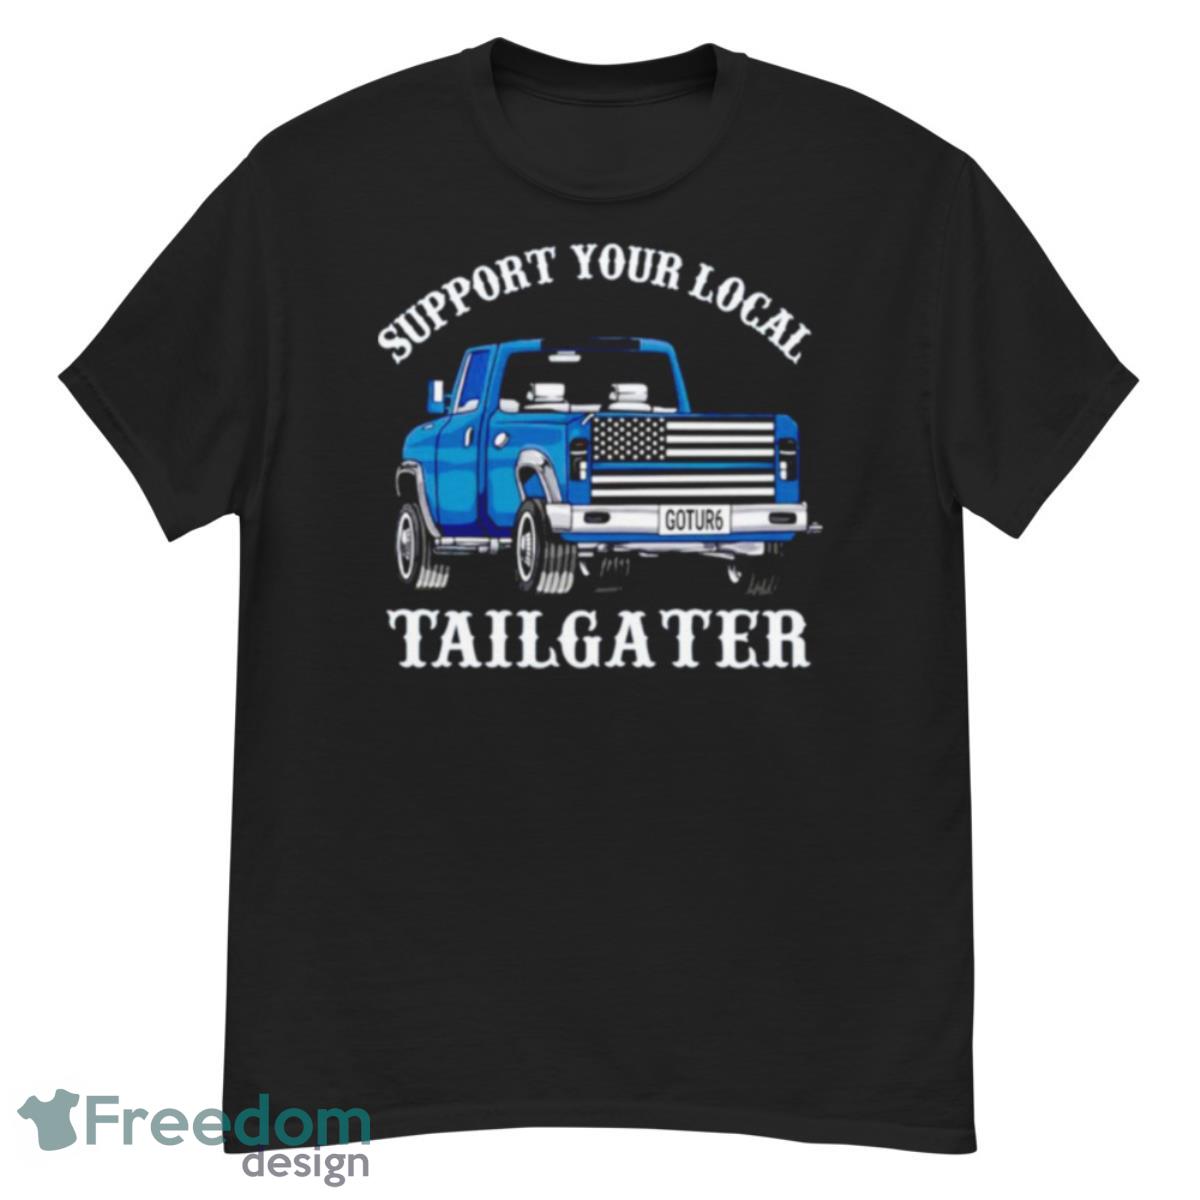 Tailgater support your local shirt - G500 Men’s Classic T-Shirt